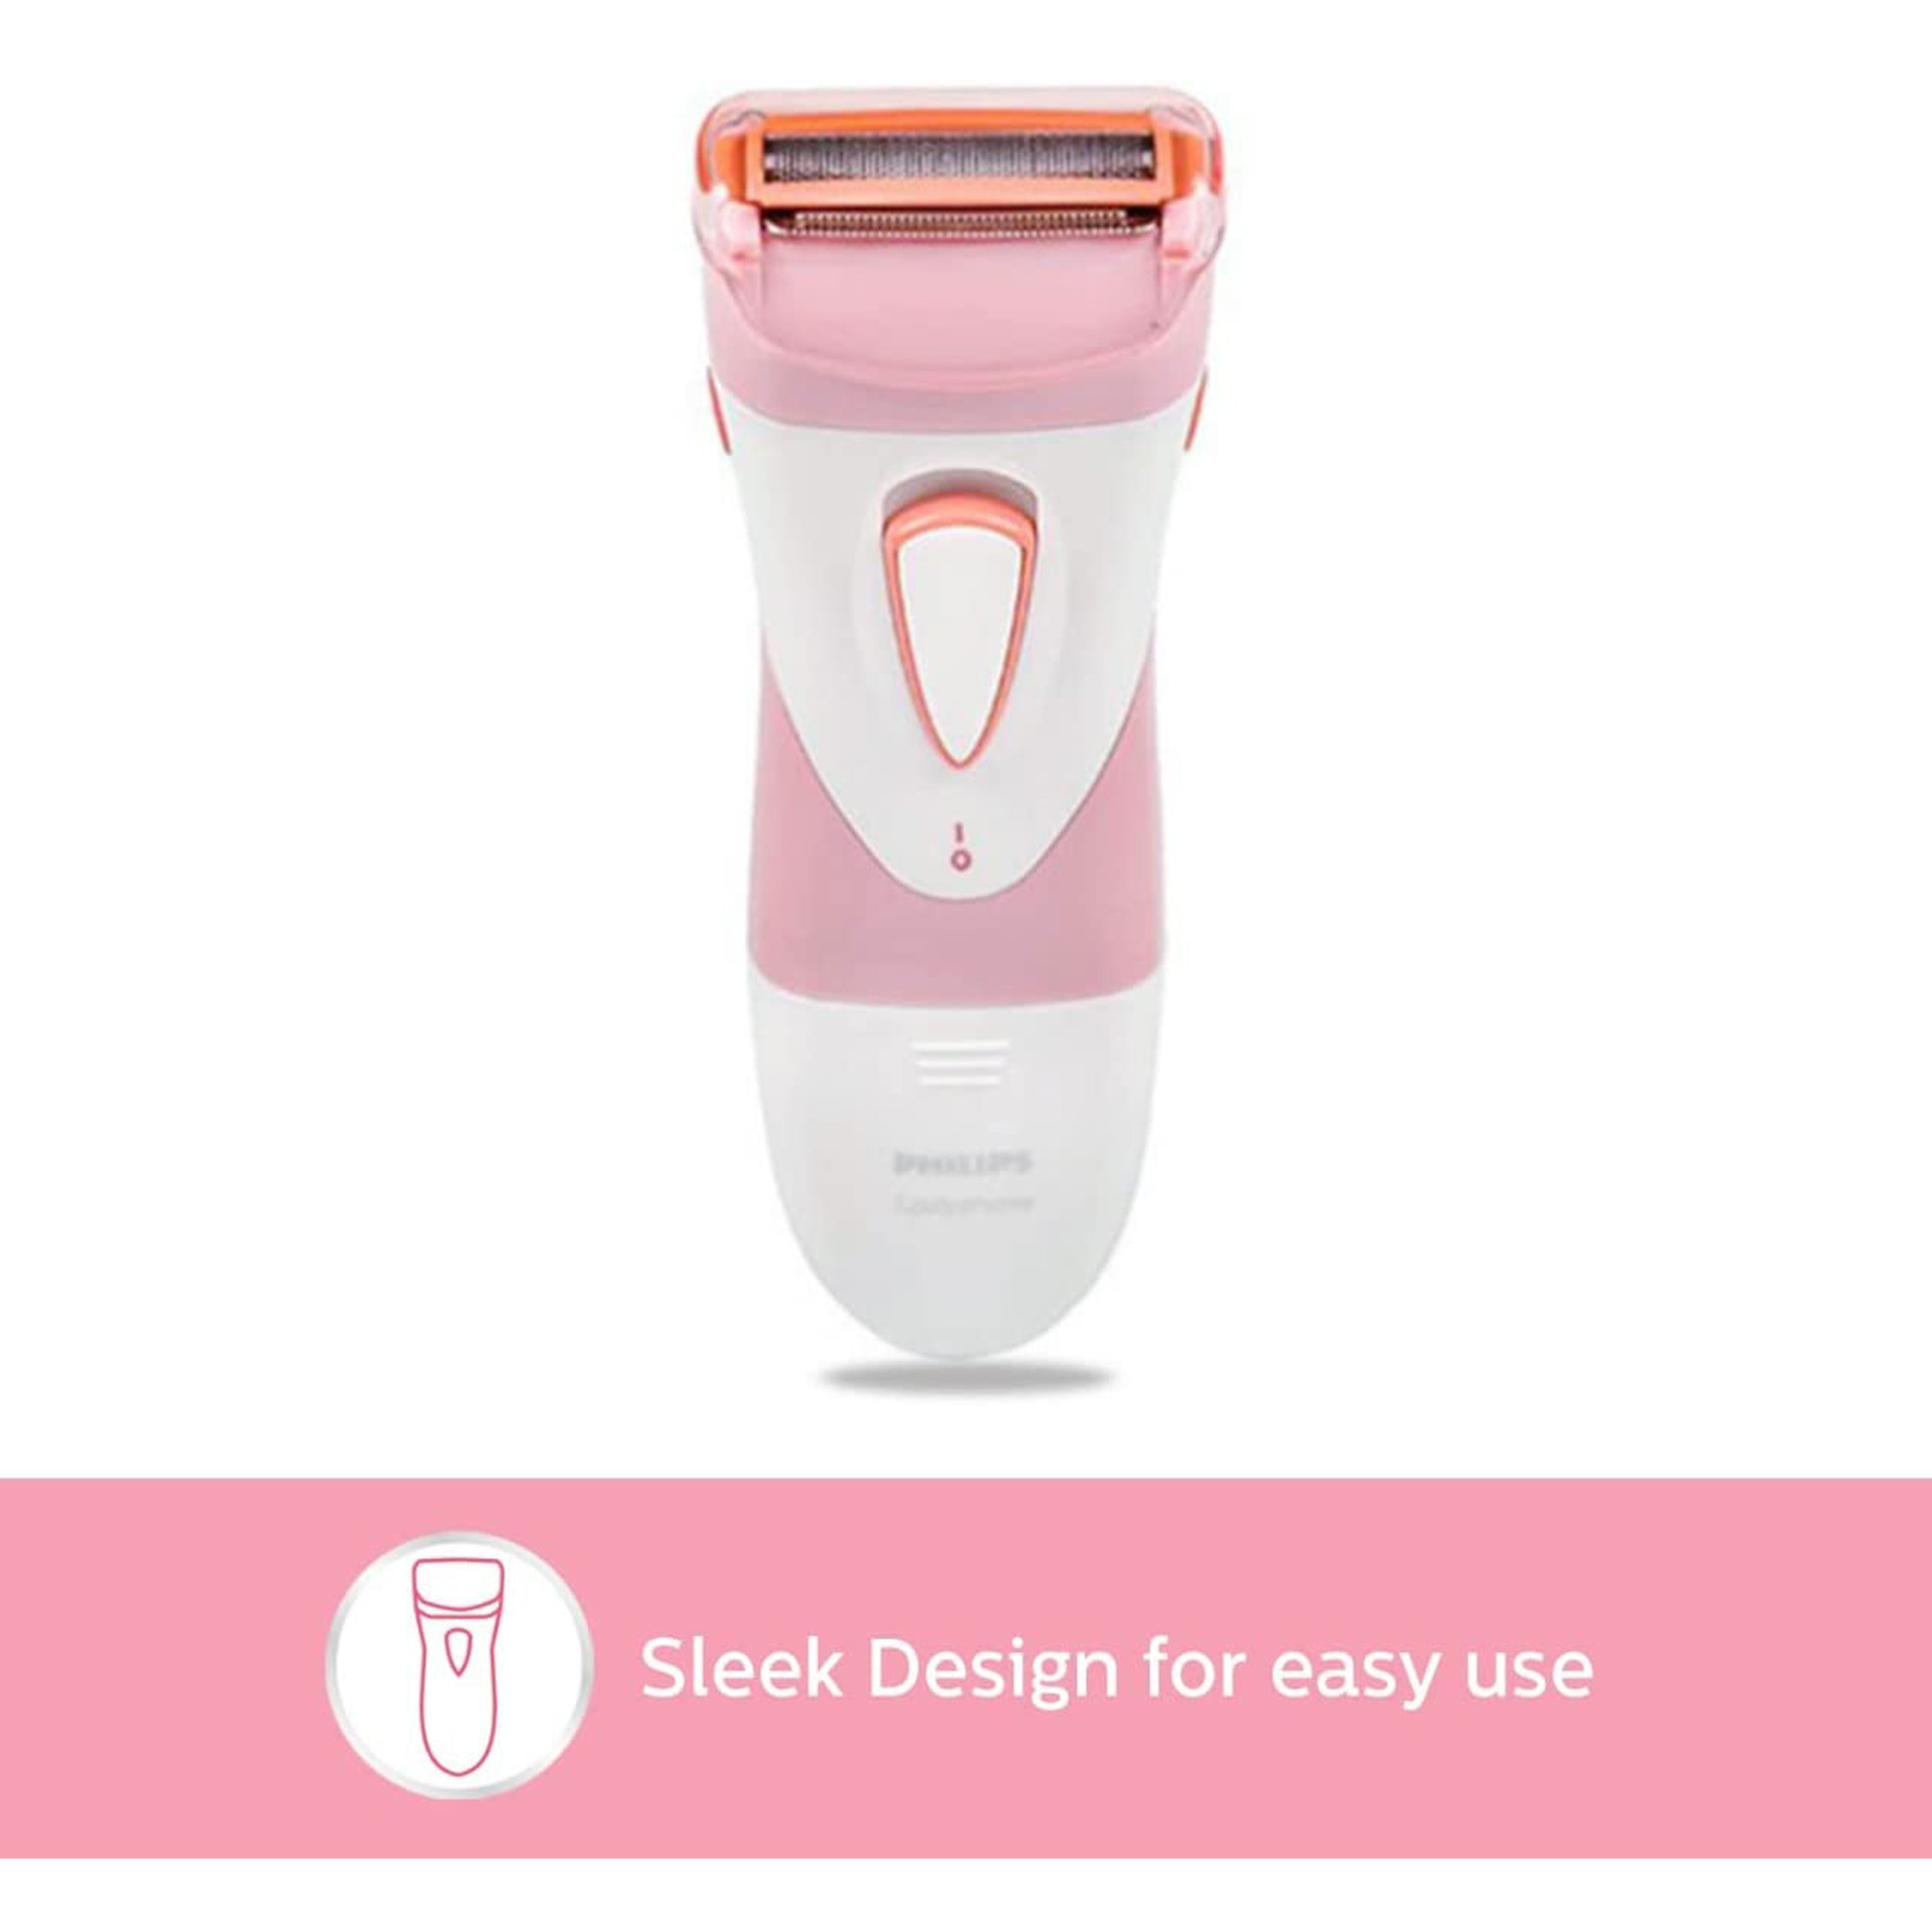 Philips SatinShave Cordless Electric Razor for Women Wet & Dry Use Lady Shaver - image 2 of 6